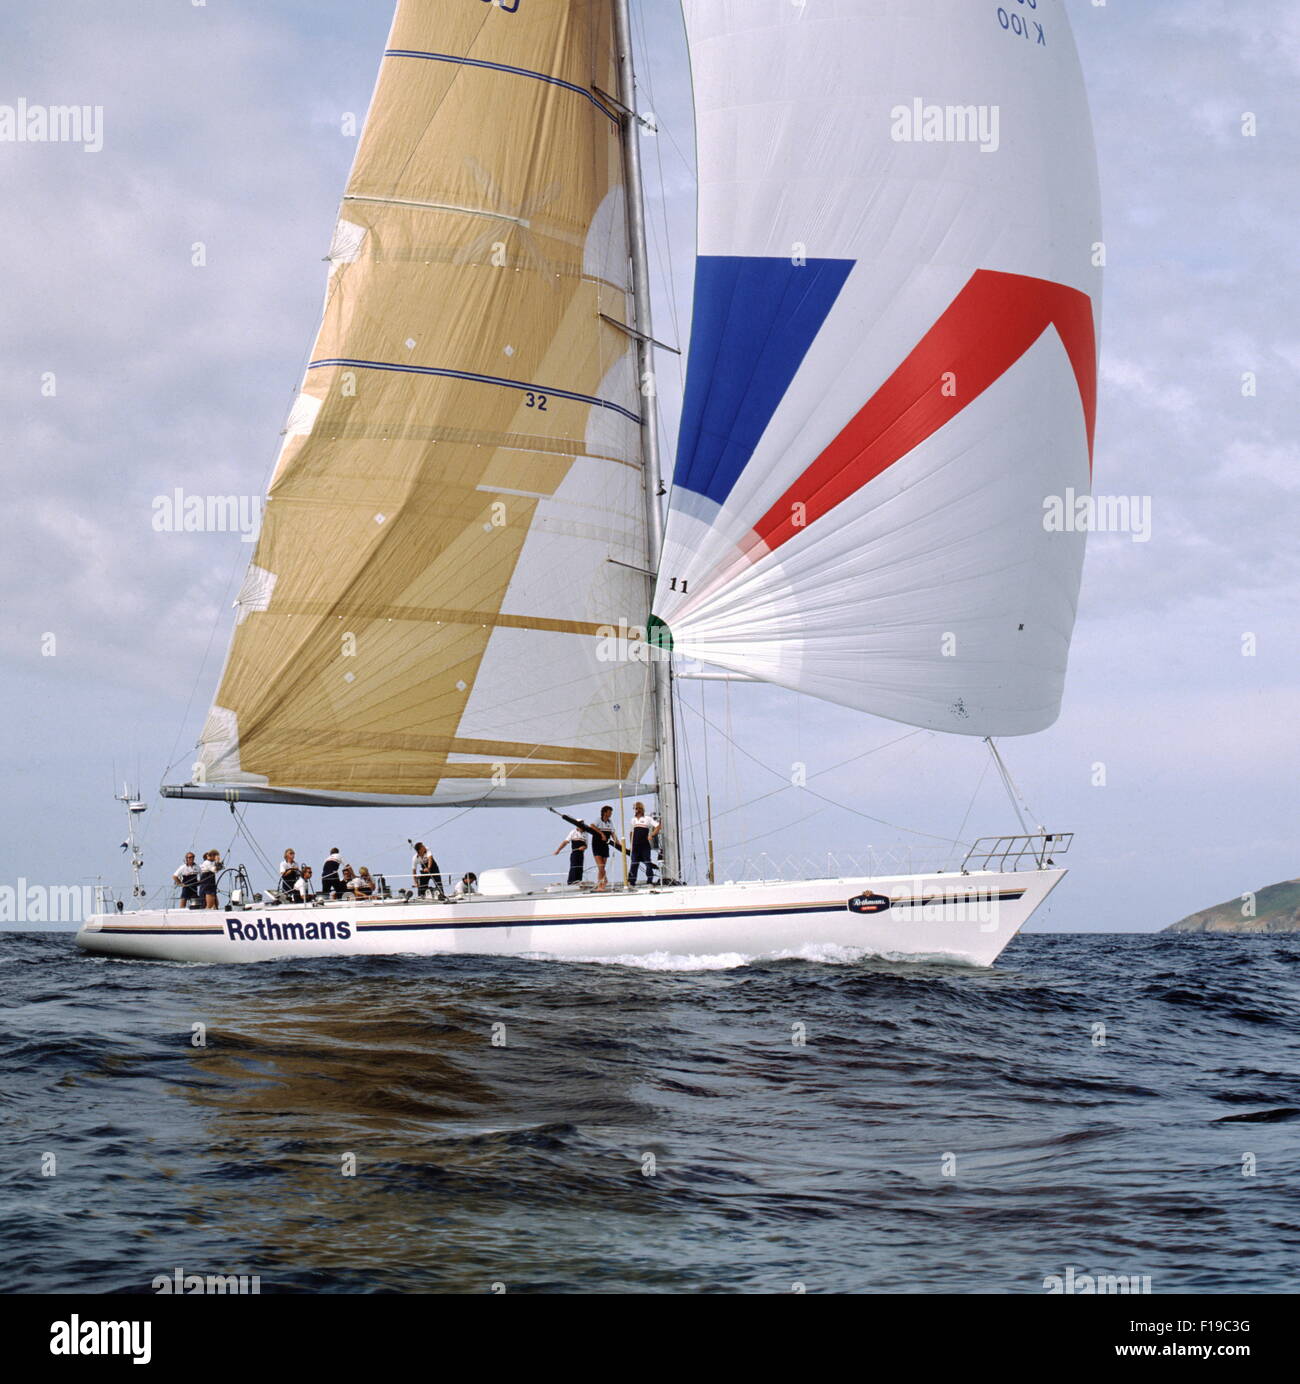 AJAXNETPHOTO. AUGUST, 1989. PLYMOUTH, ENGLAND. - MAXI YACHT NEARS FINISH. - ROTHMANS (GBR) NEARS THE END OF THE 605 MILE FASTNET RACE. SKIPPERED BY LAWRIE SMITH, THE ROB HUMPHREY'S DESIGNED YACHT IS A WHITBREAD ENTRY. PHOTO:JONATHAN EASTLAND/AJAX REF:920381 8 1 Stock Photo